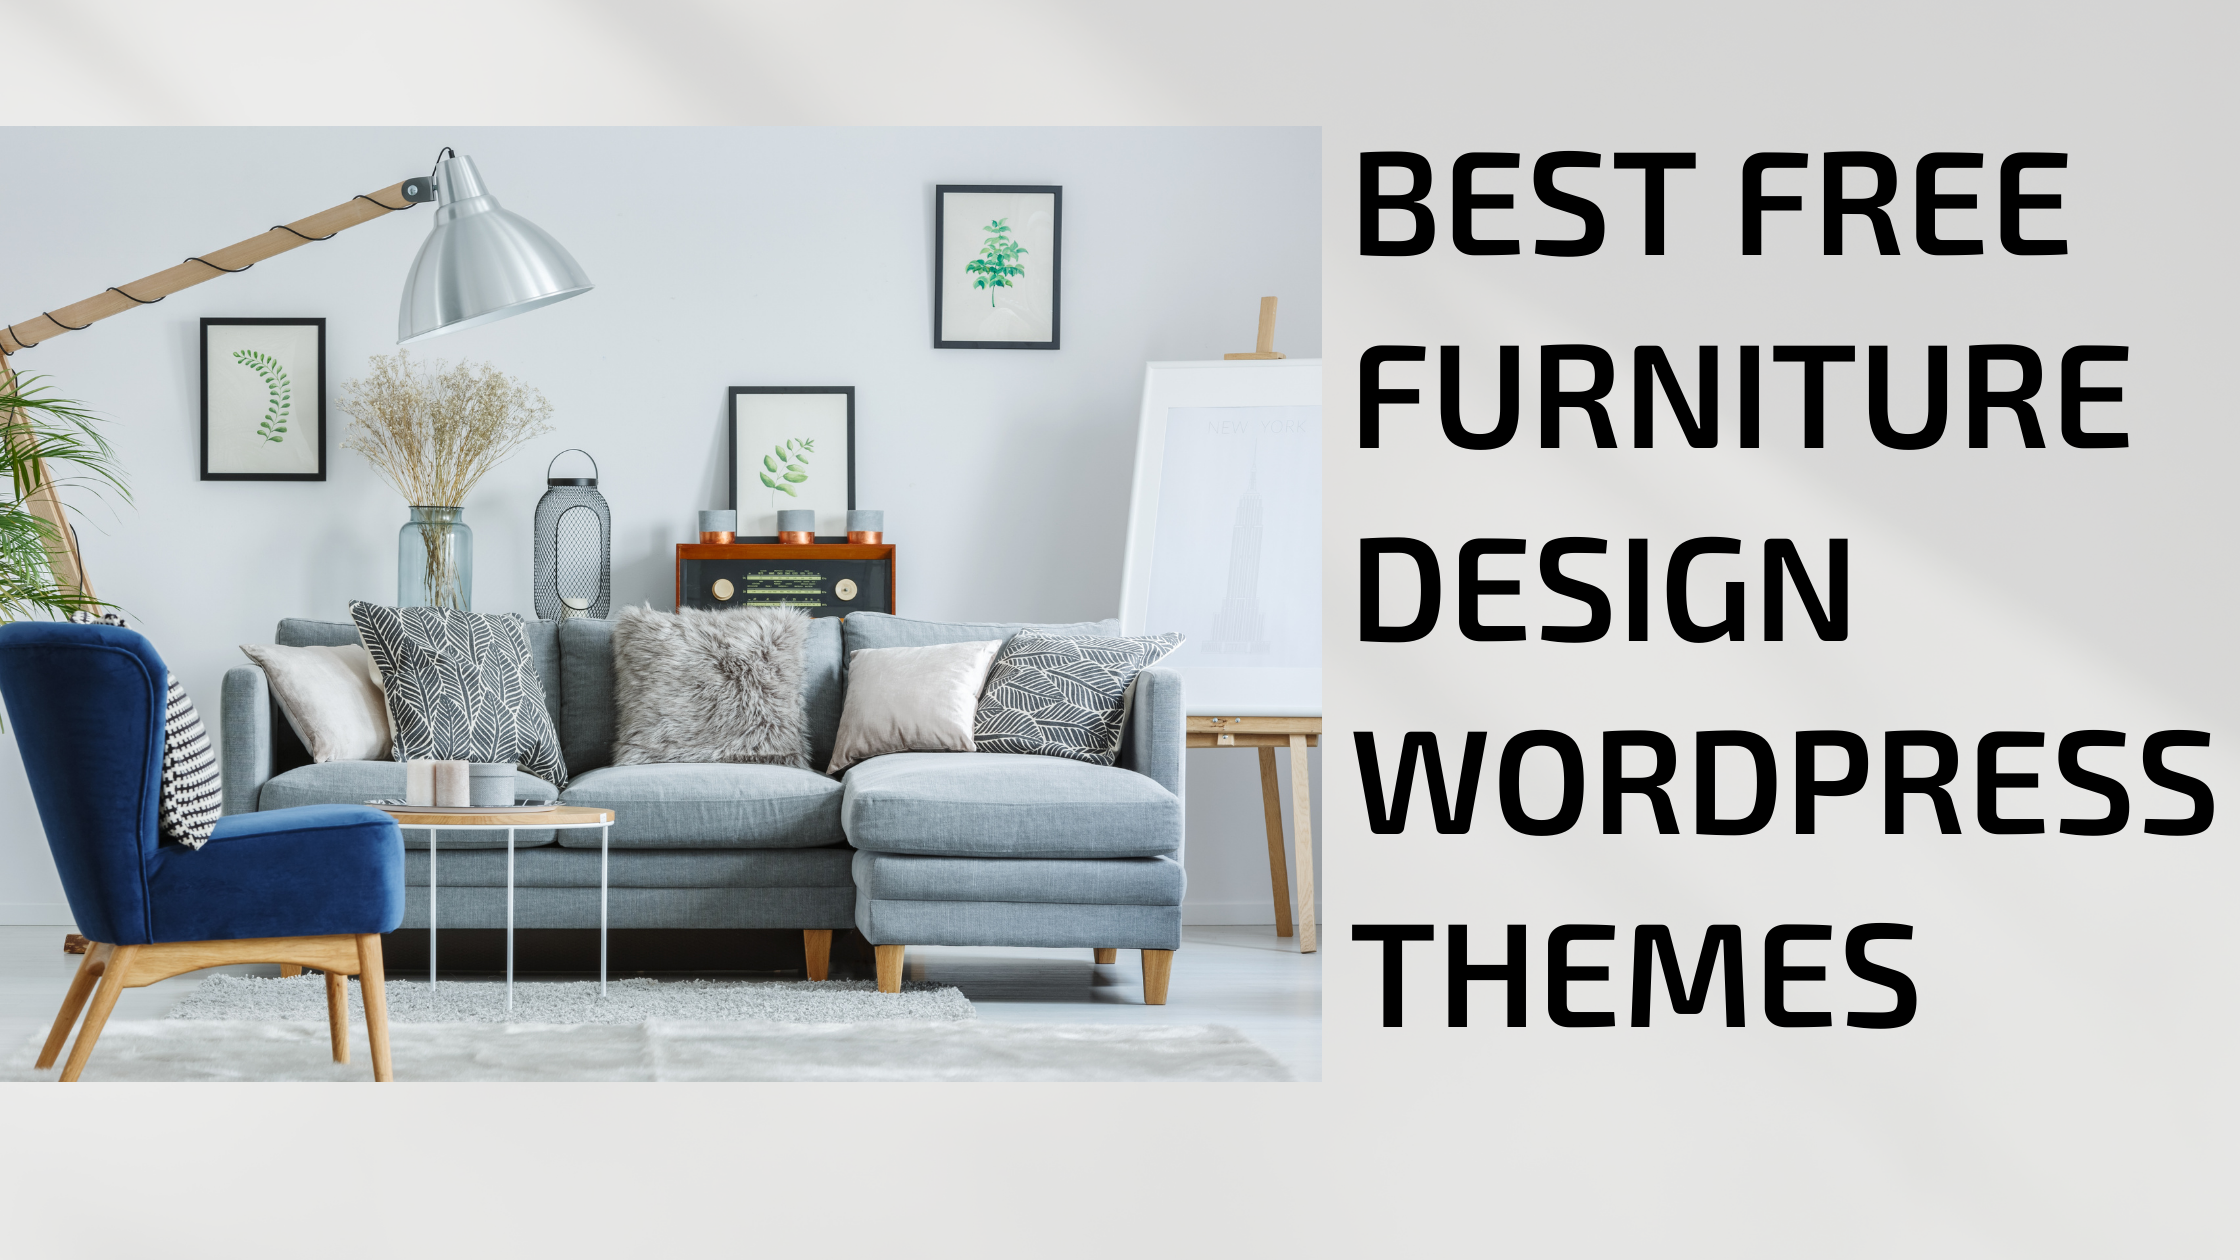 Best Free Furniture Design WordPress Themes To Try In 2022 post thumbnail image